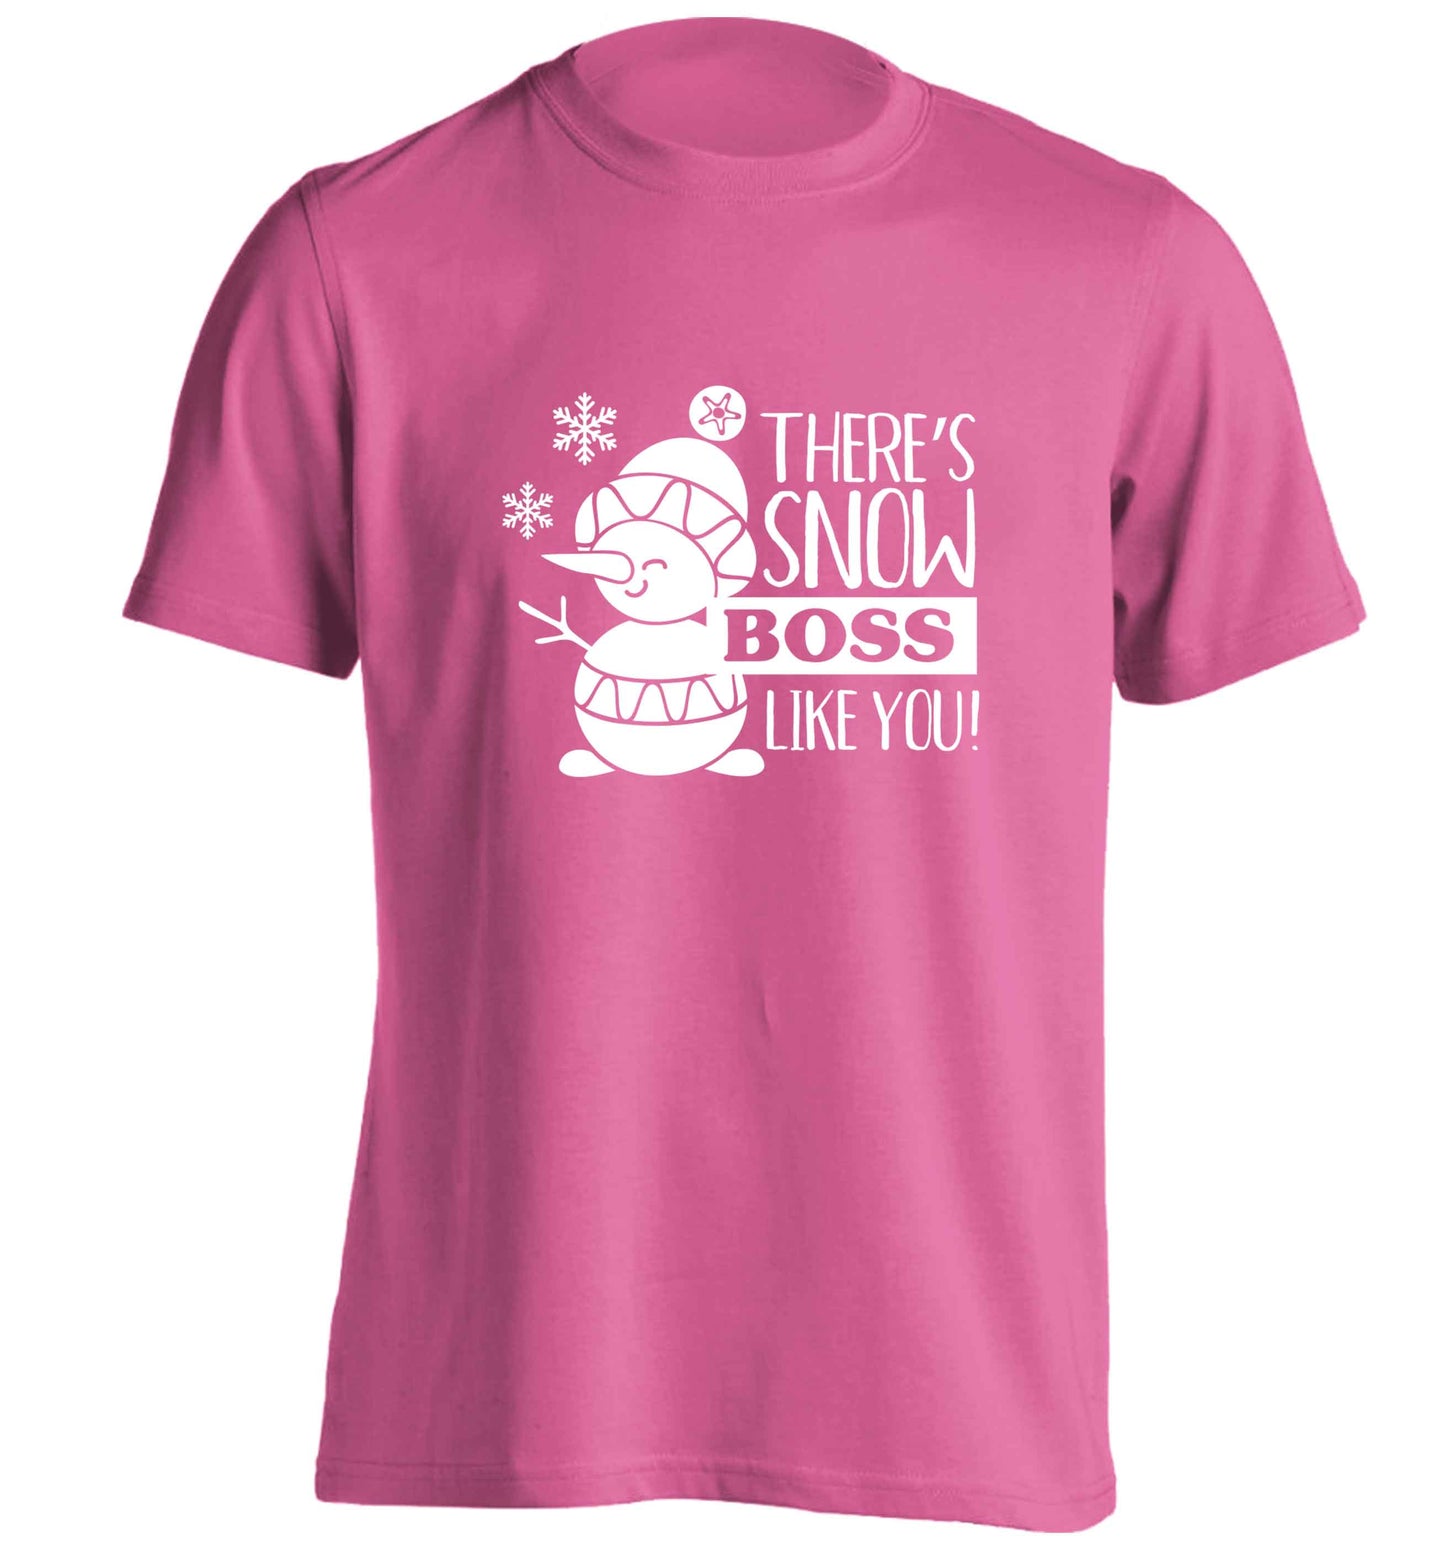 There's snow boss like you adults unisex pink Tshirt 2XL